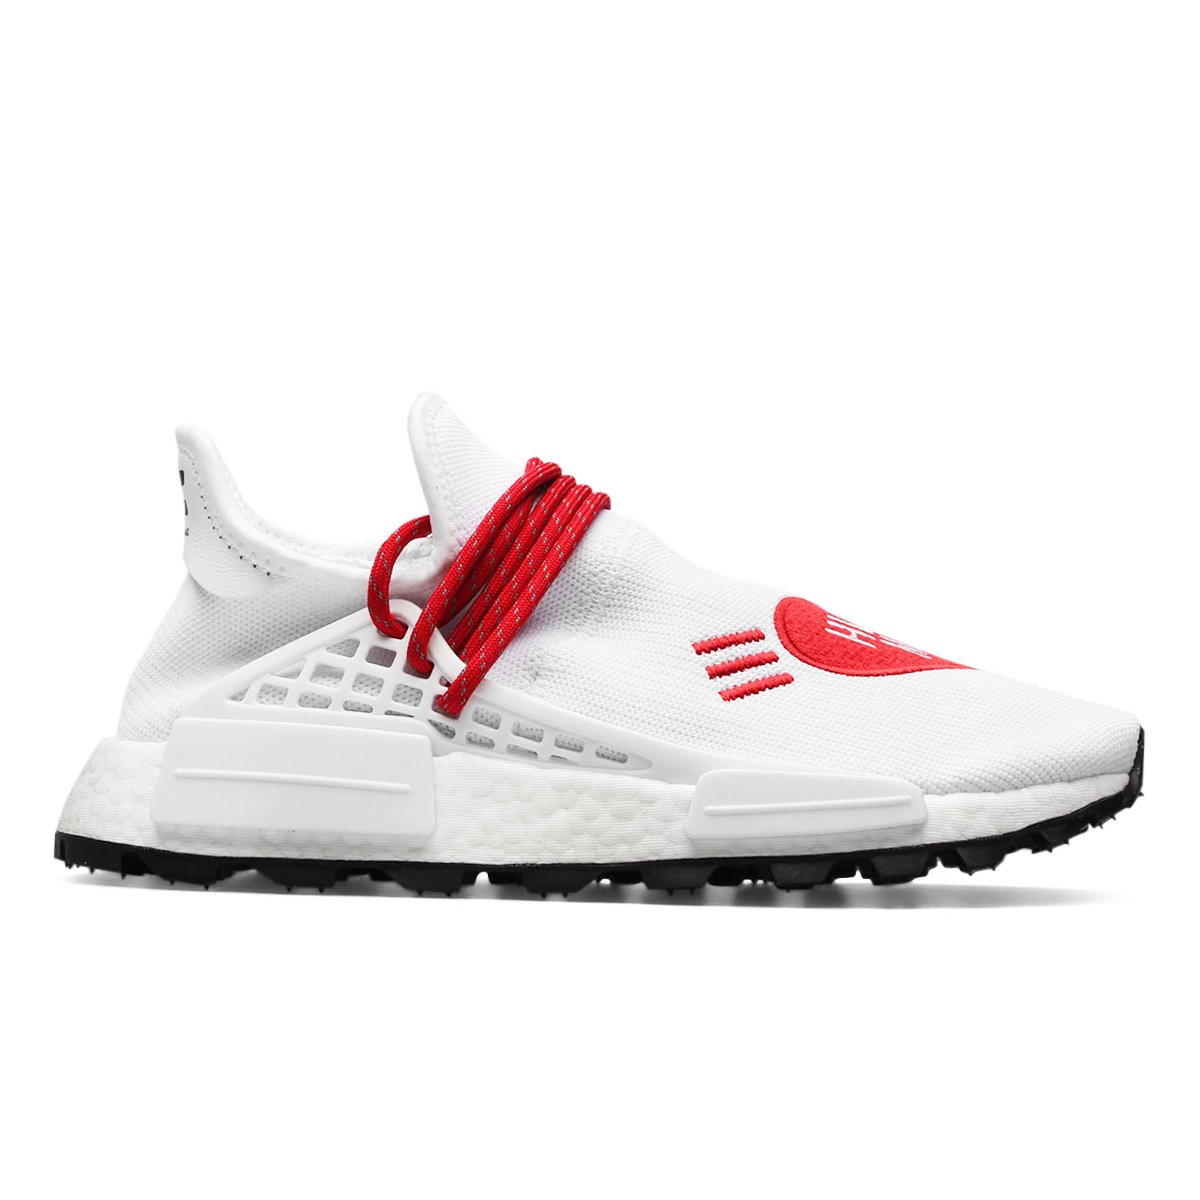 human races with red heart